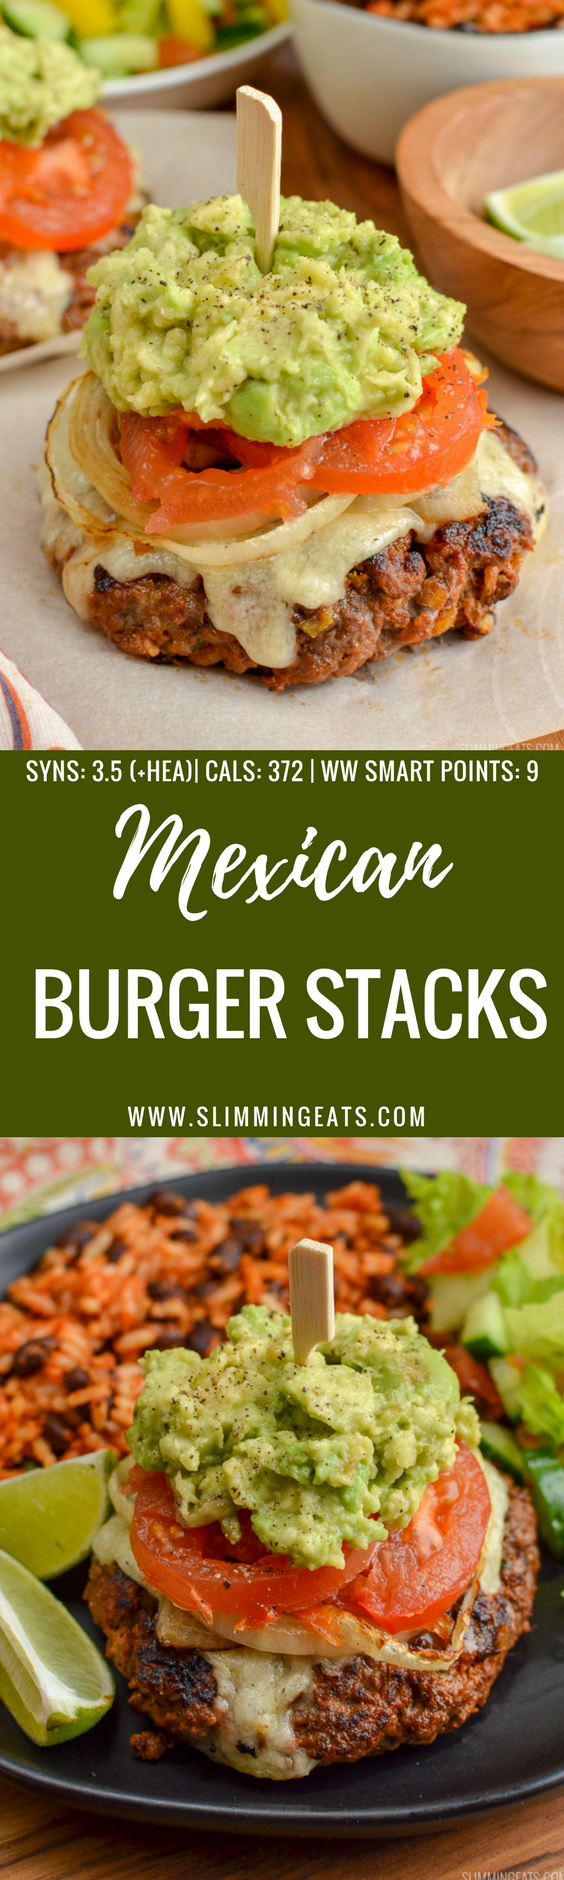 The Ultimate Slimming World Mexican Burgers - tender juicy burger stacks, topped with melted cheese, caramelized onions, ripe tomatoes and mashed avocado. Gluten-Free, Slimming World and Weight Watchers friendly | www.slimmingeats.com